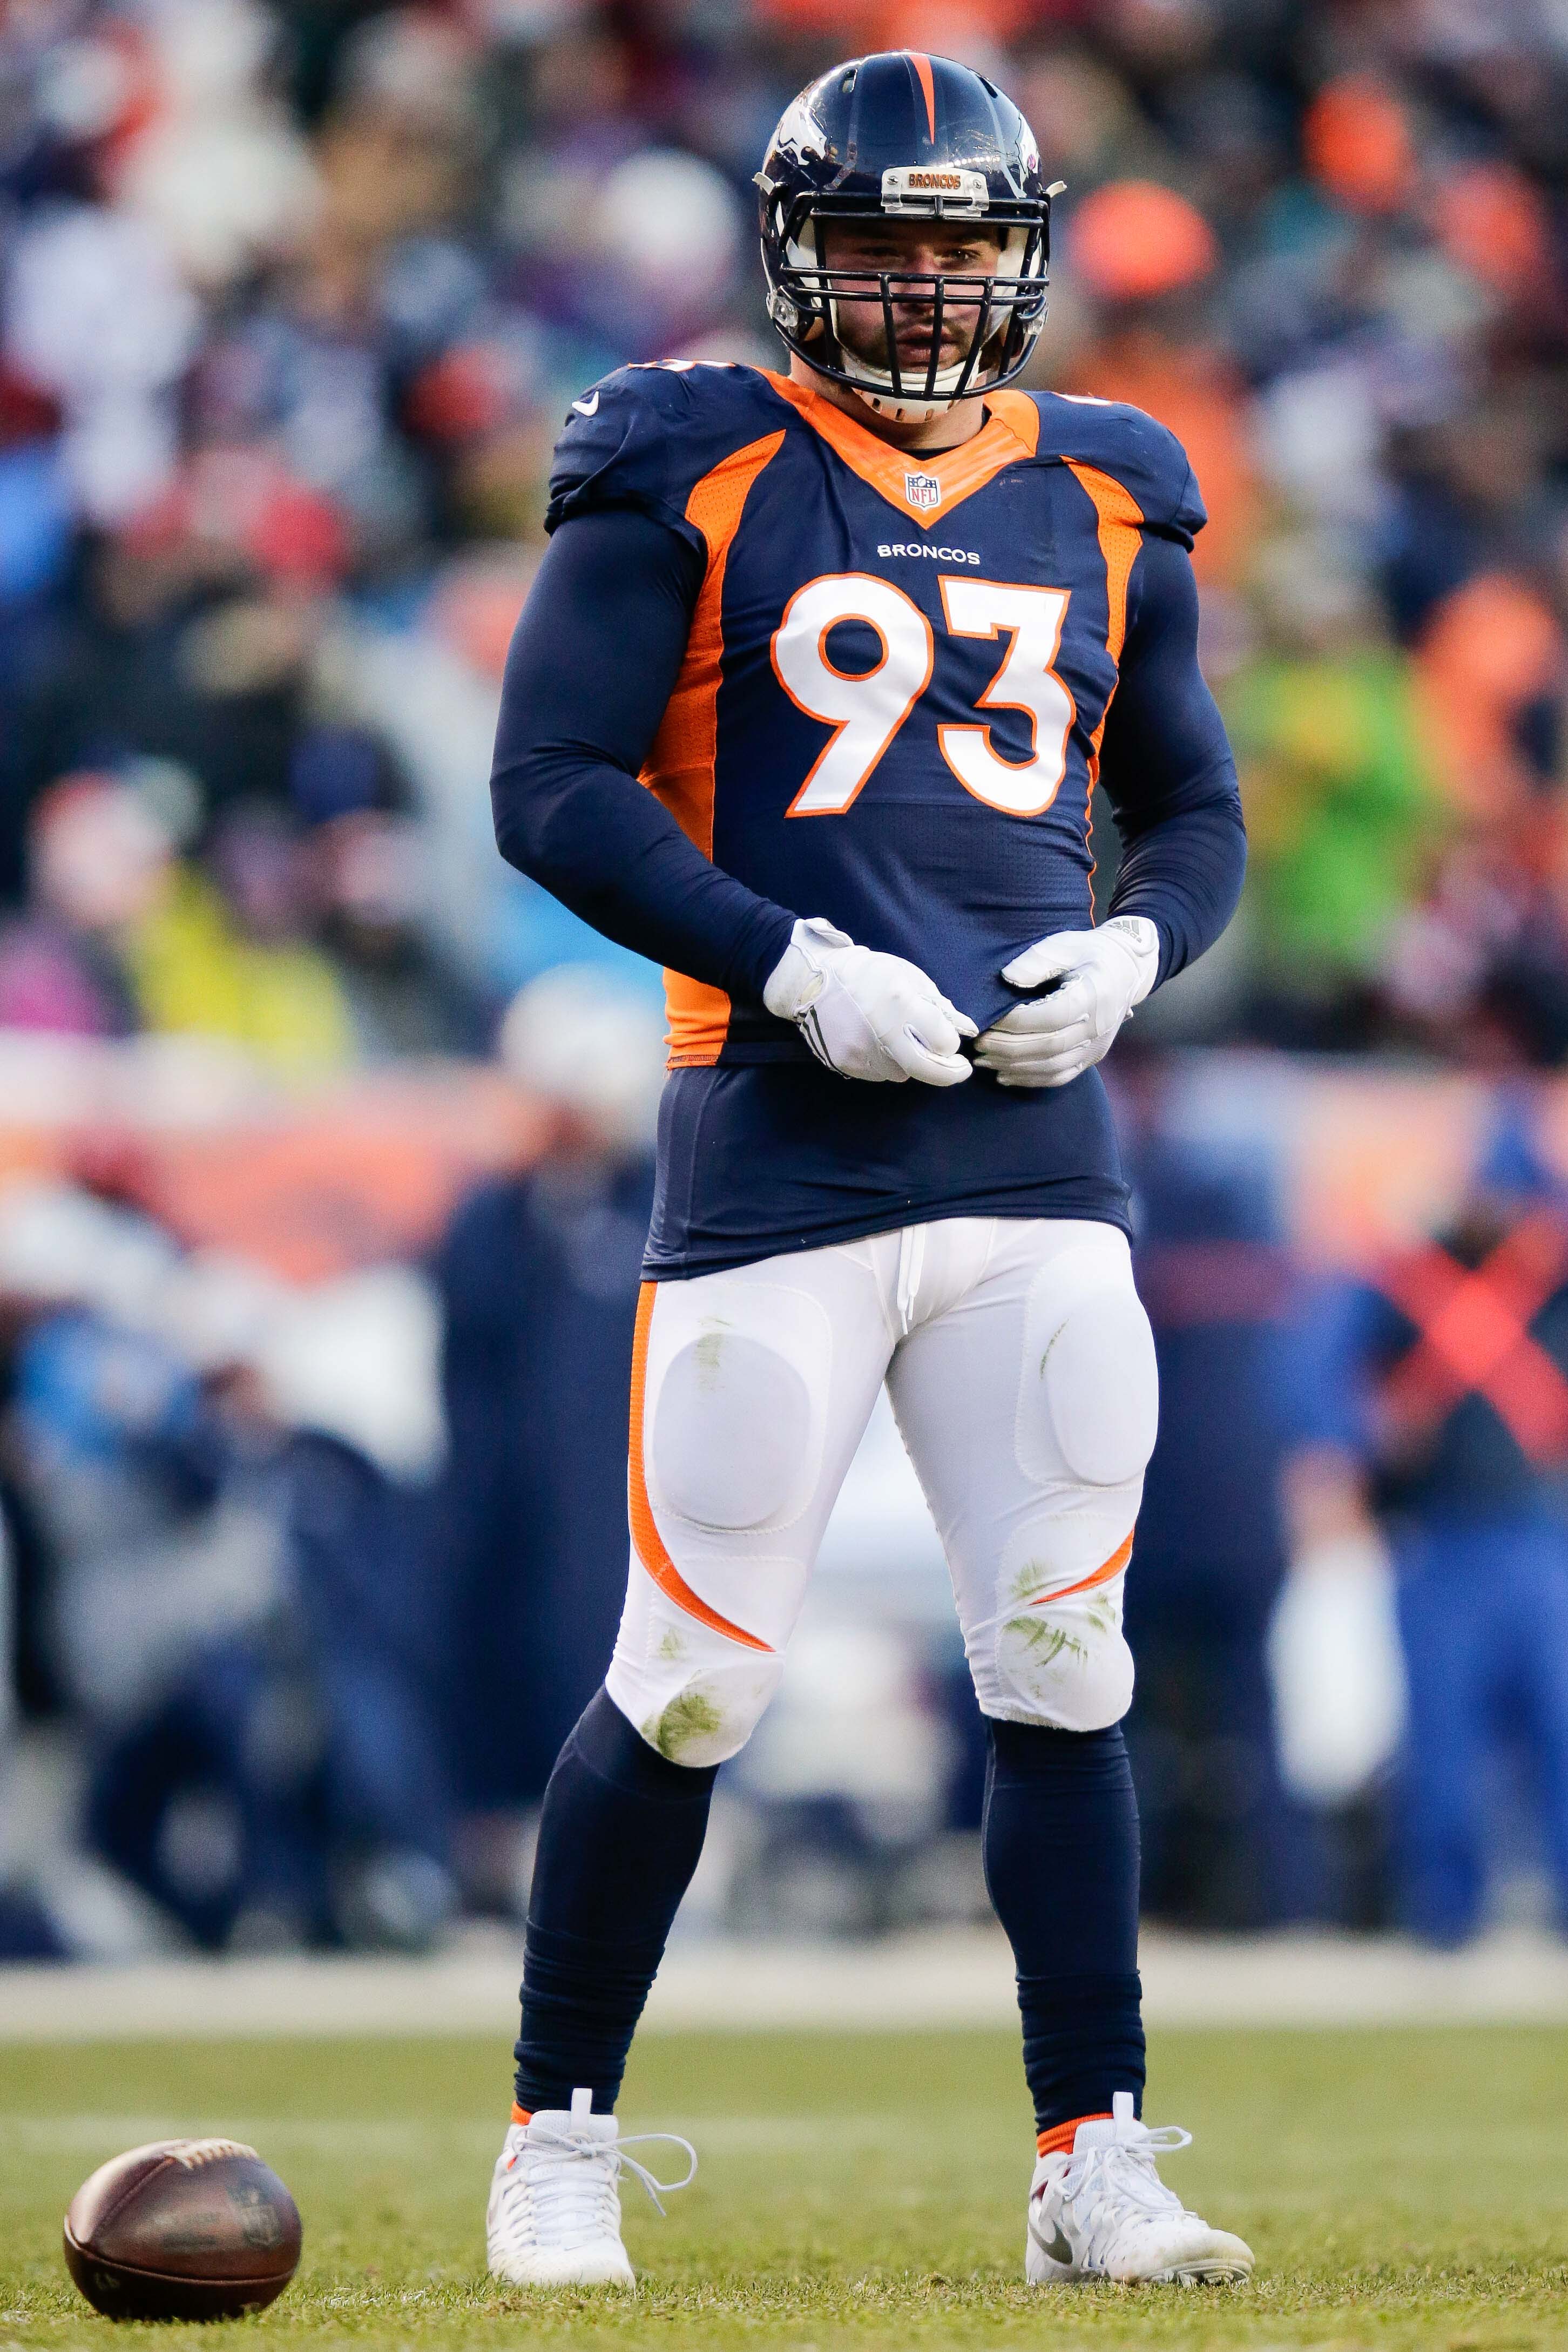 Broncos' Jared Crick To Have Back Surgery